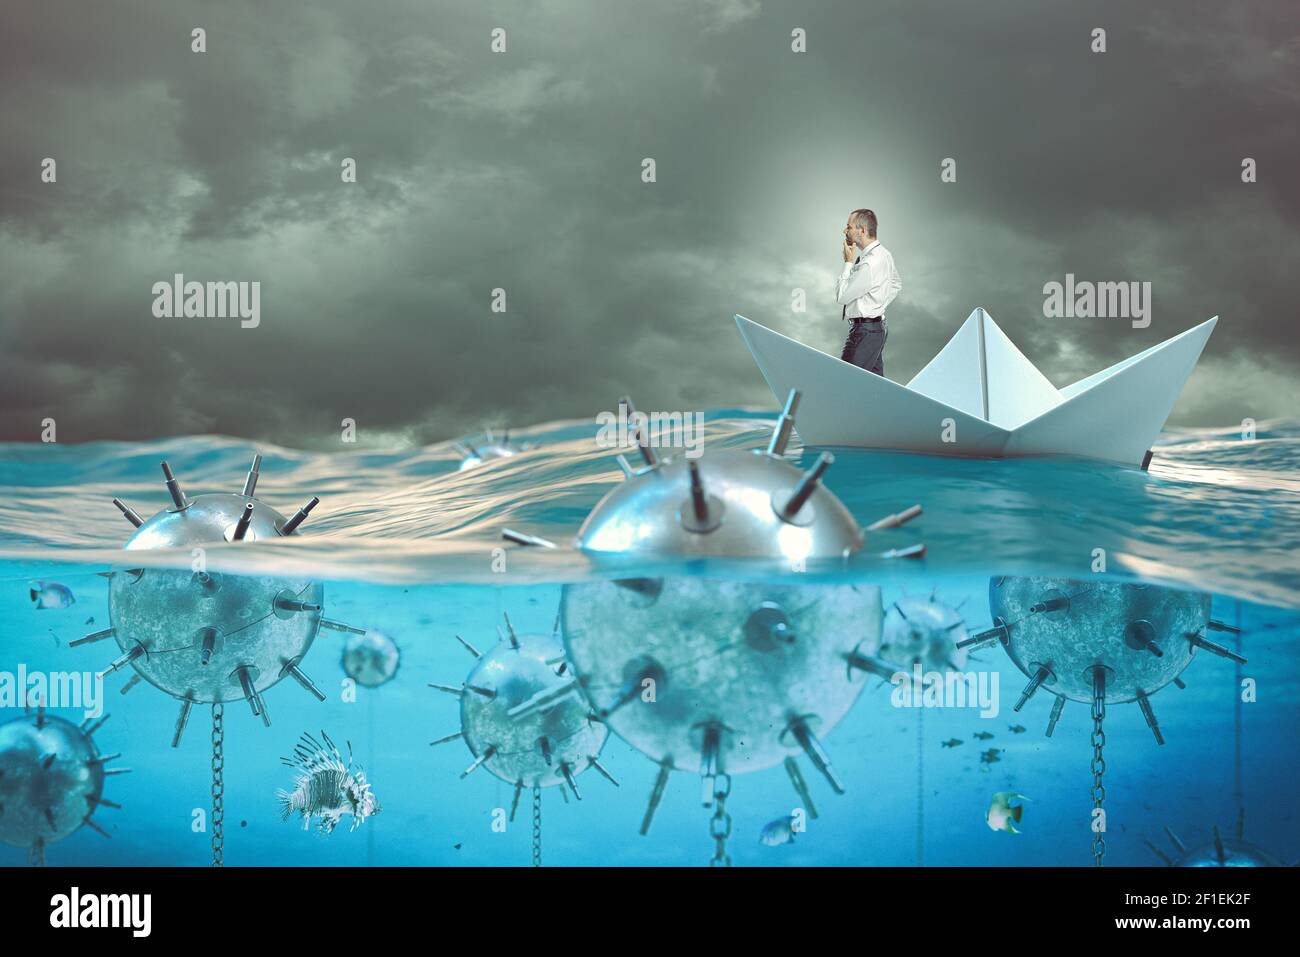 pensive businessman on a paper boat in the sea surrounded by mines. Stock Photo